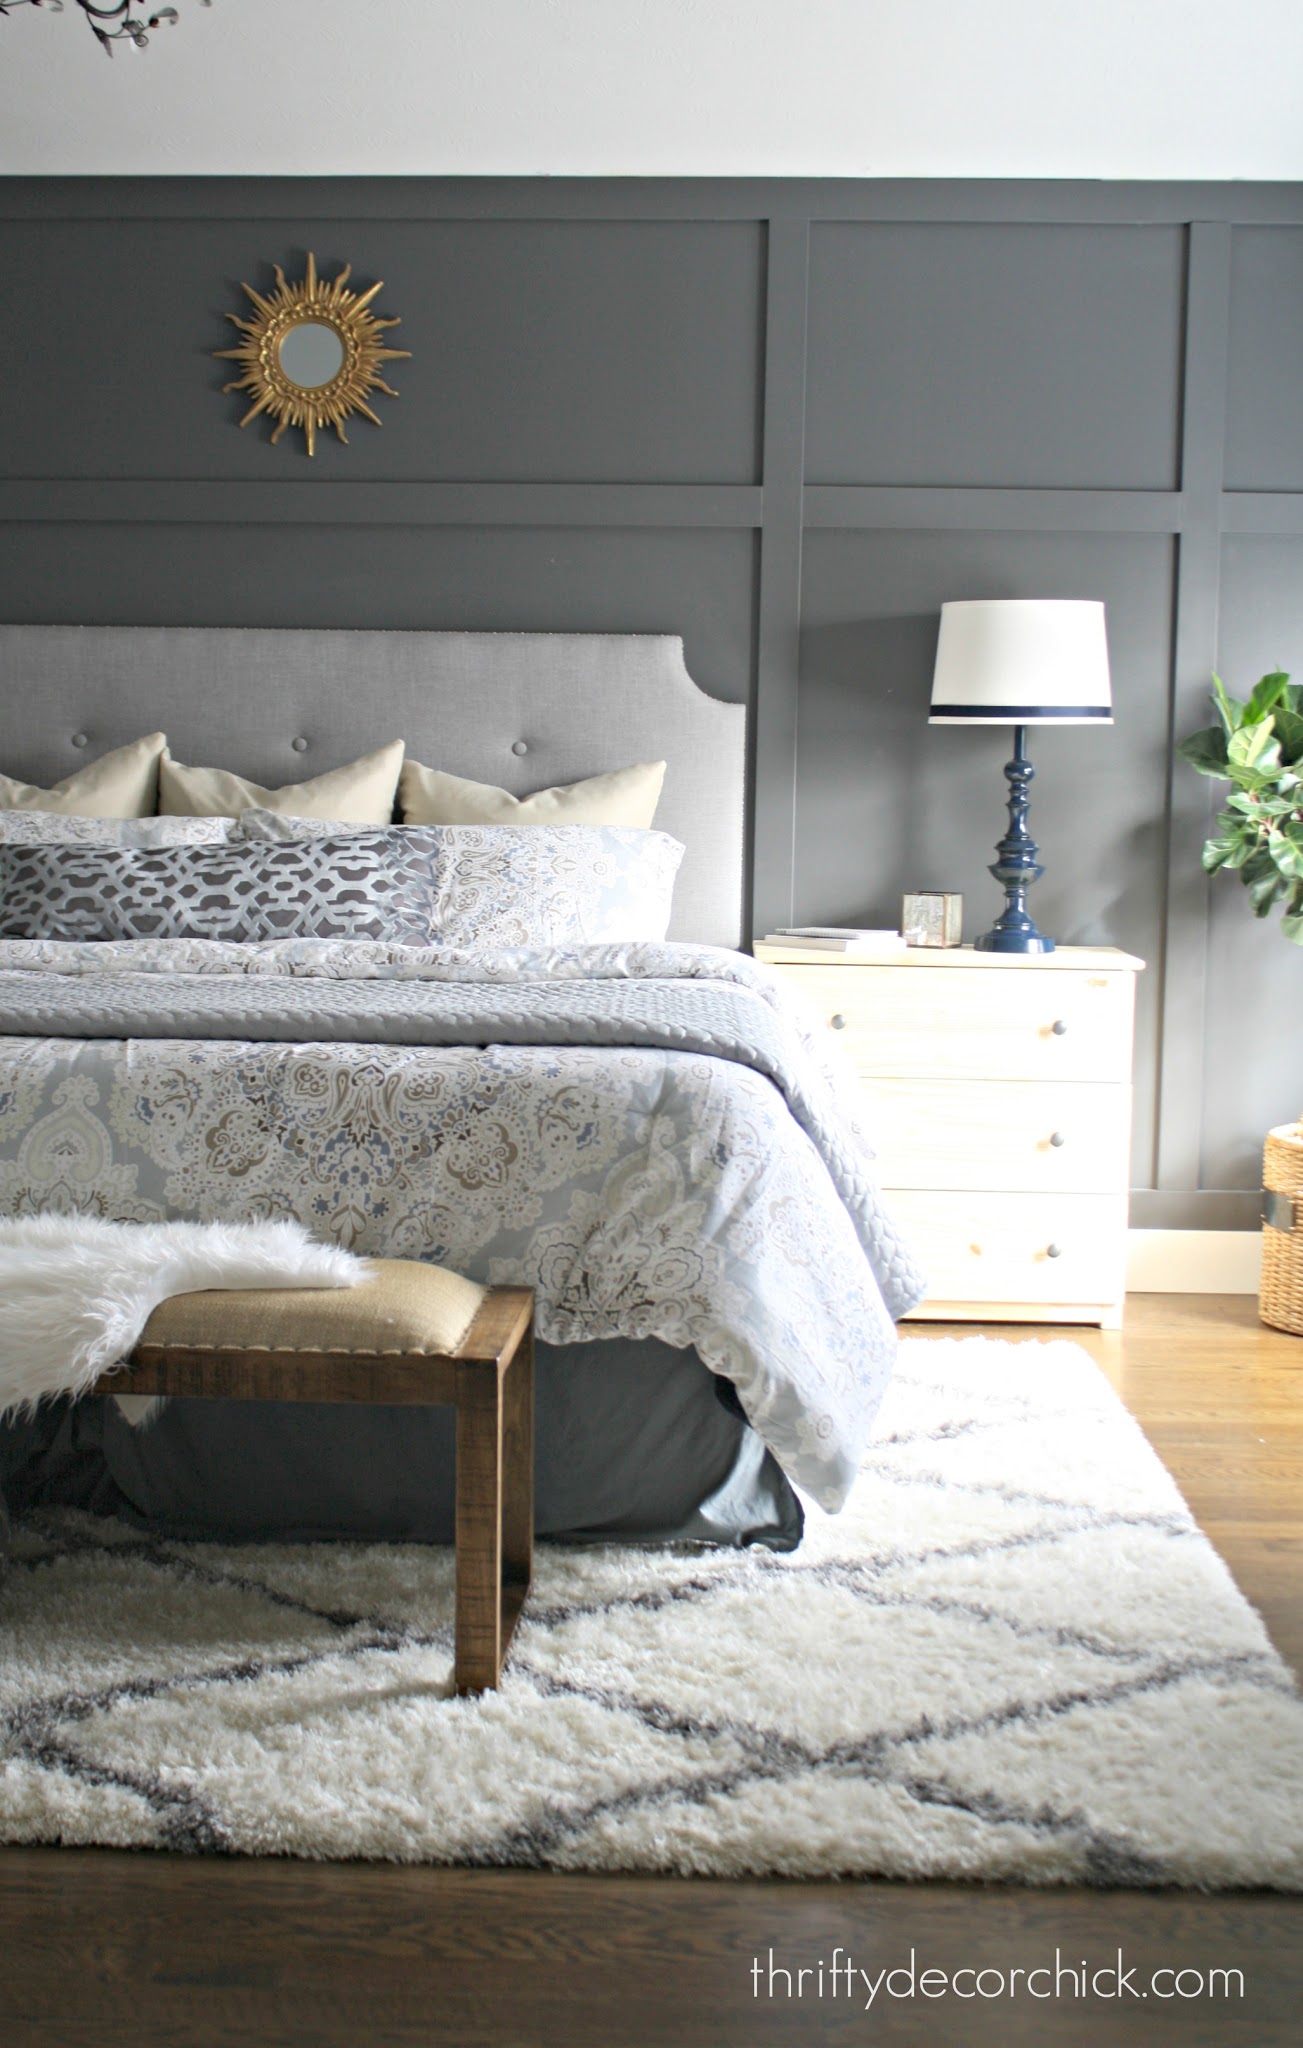 How to make a DIY tufted headboard